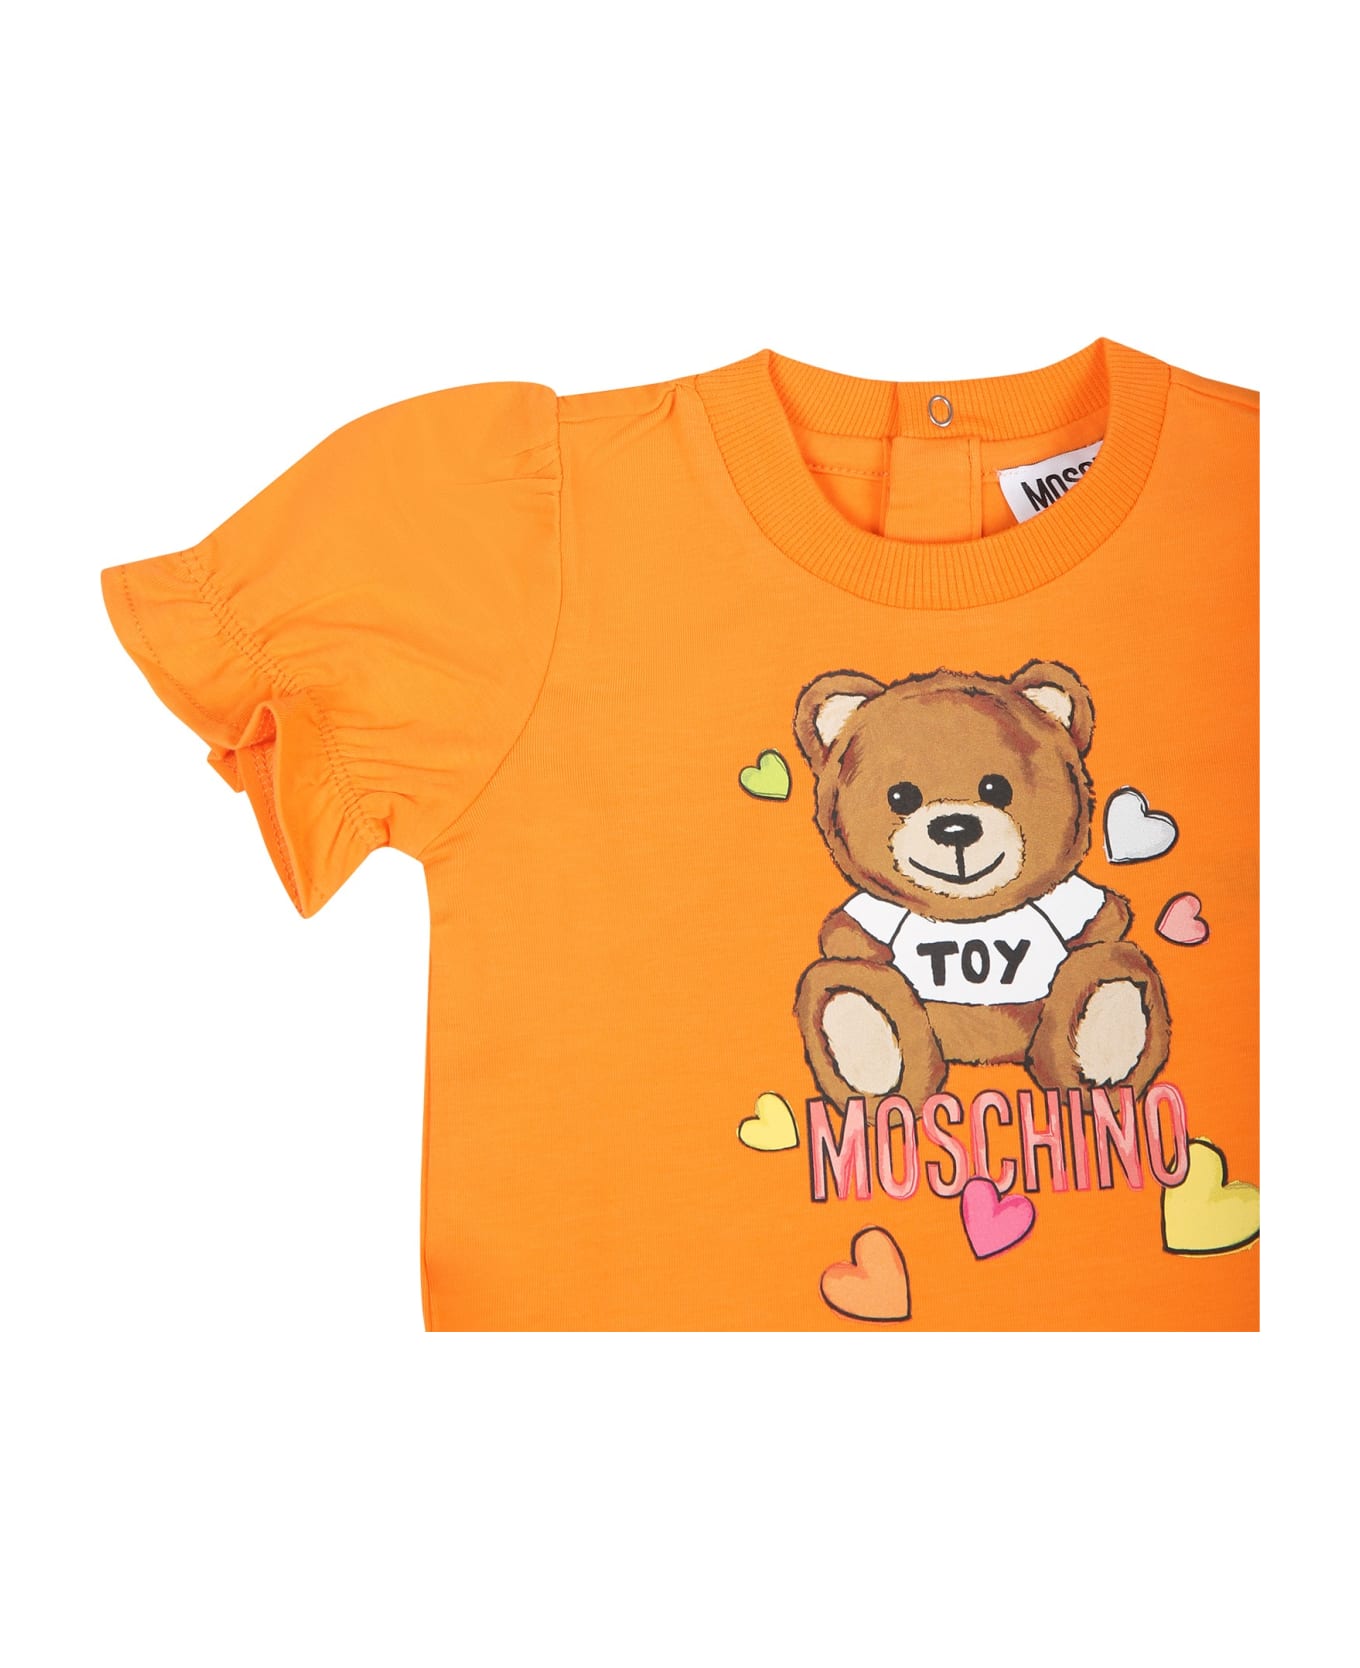 Moschino Orange Dress For Baby Girl With Teddy Bear And Hearts - Orange